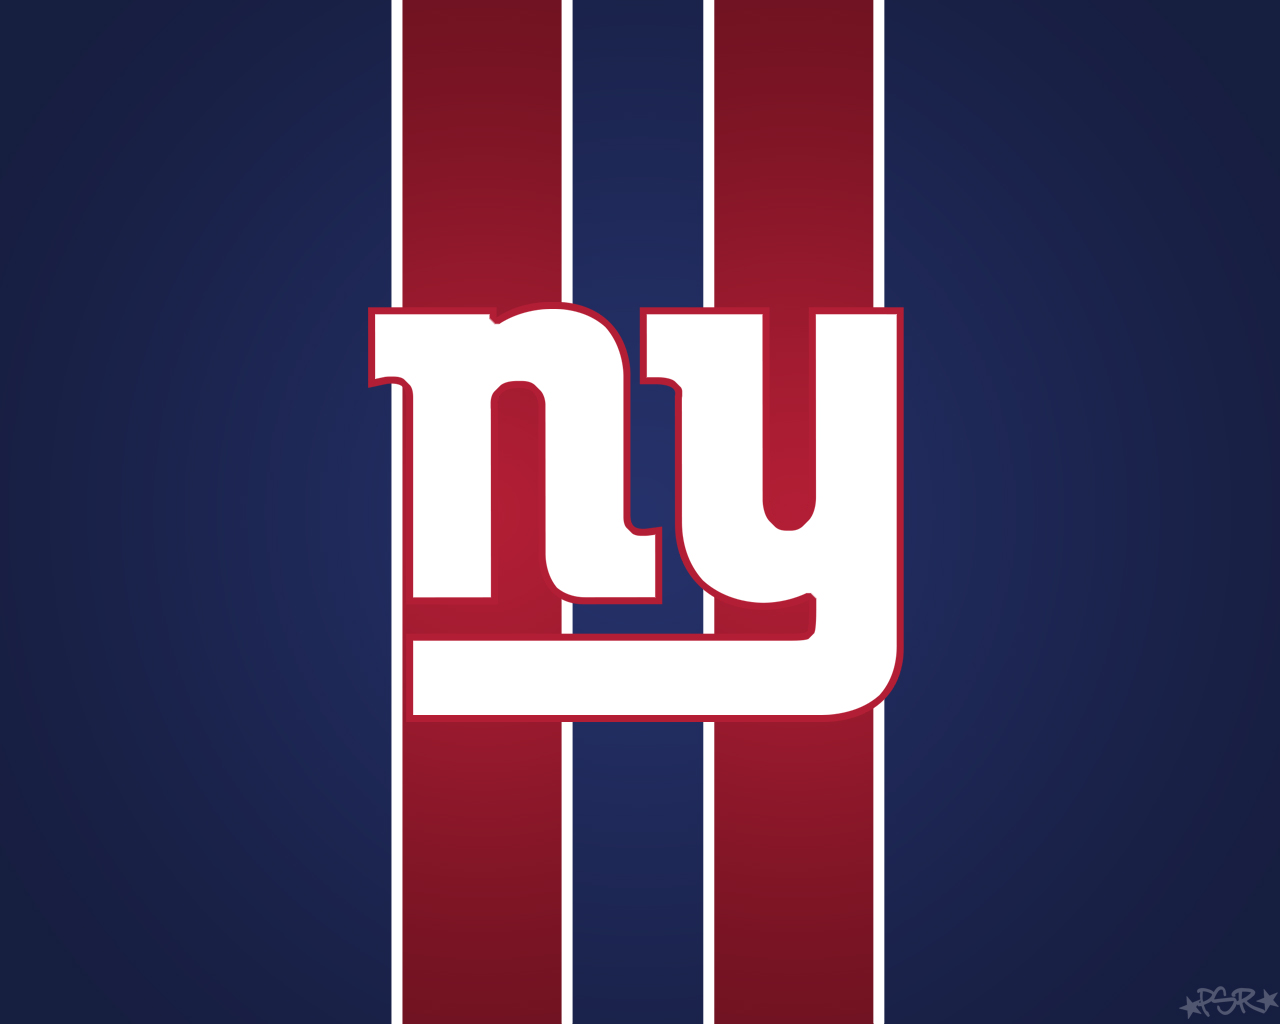 New York Giants Logo w/ Stripes and Red Background (by ~pasar3) 